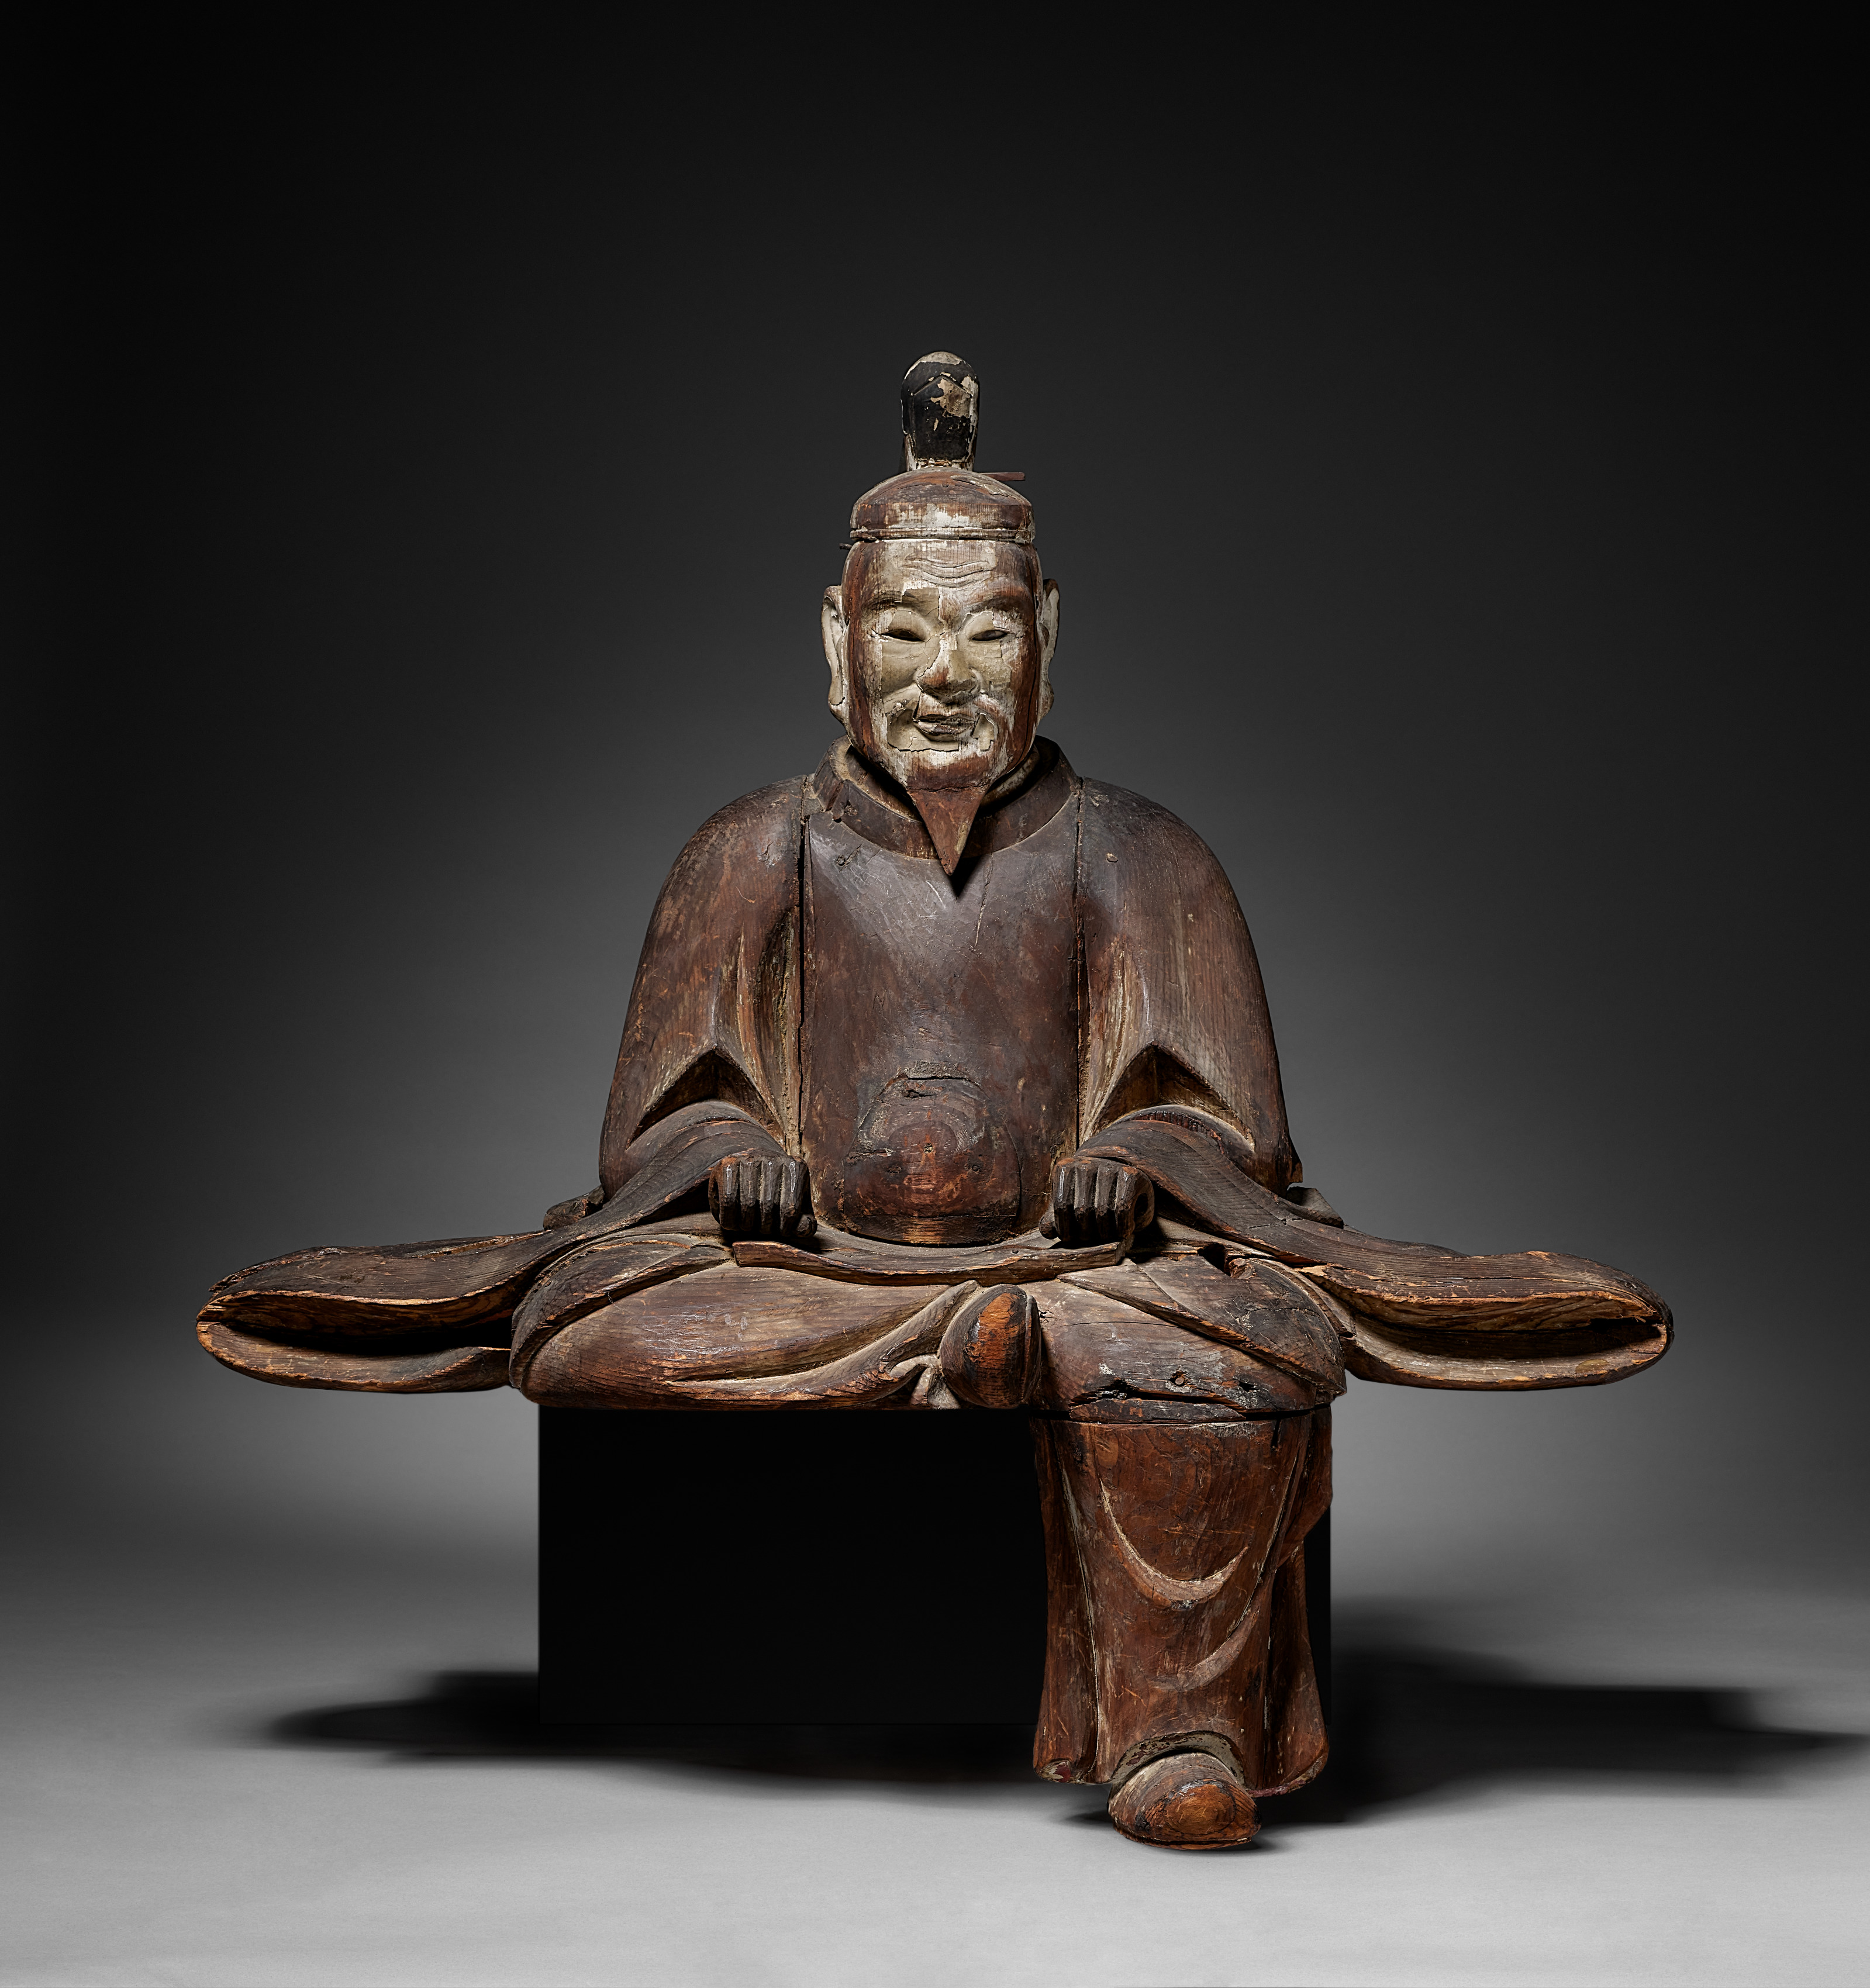 One of a Pair of Guardian Figures (Zuishin)